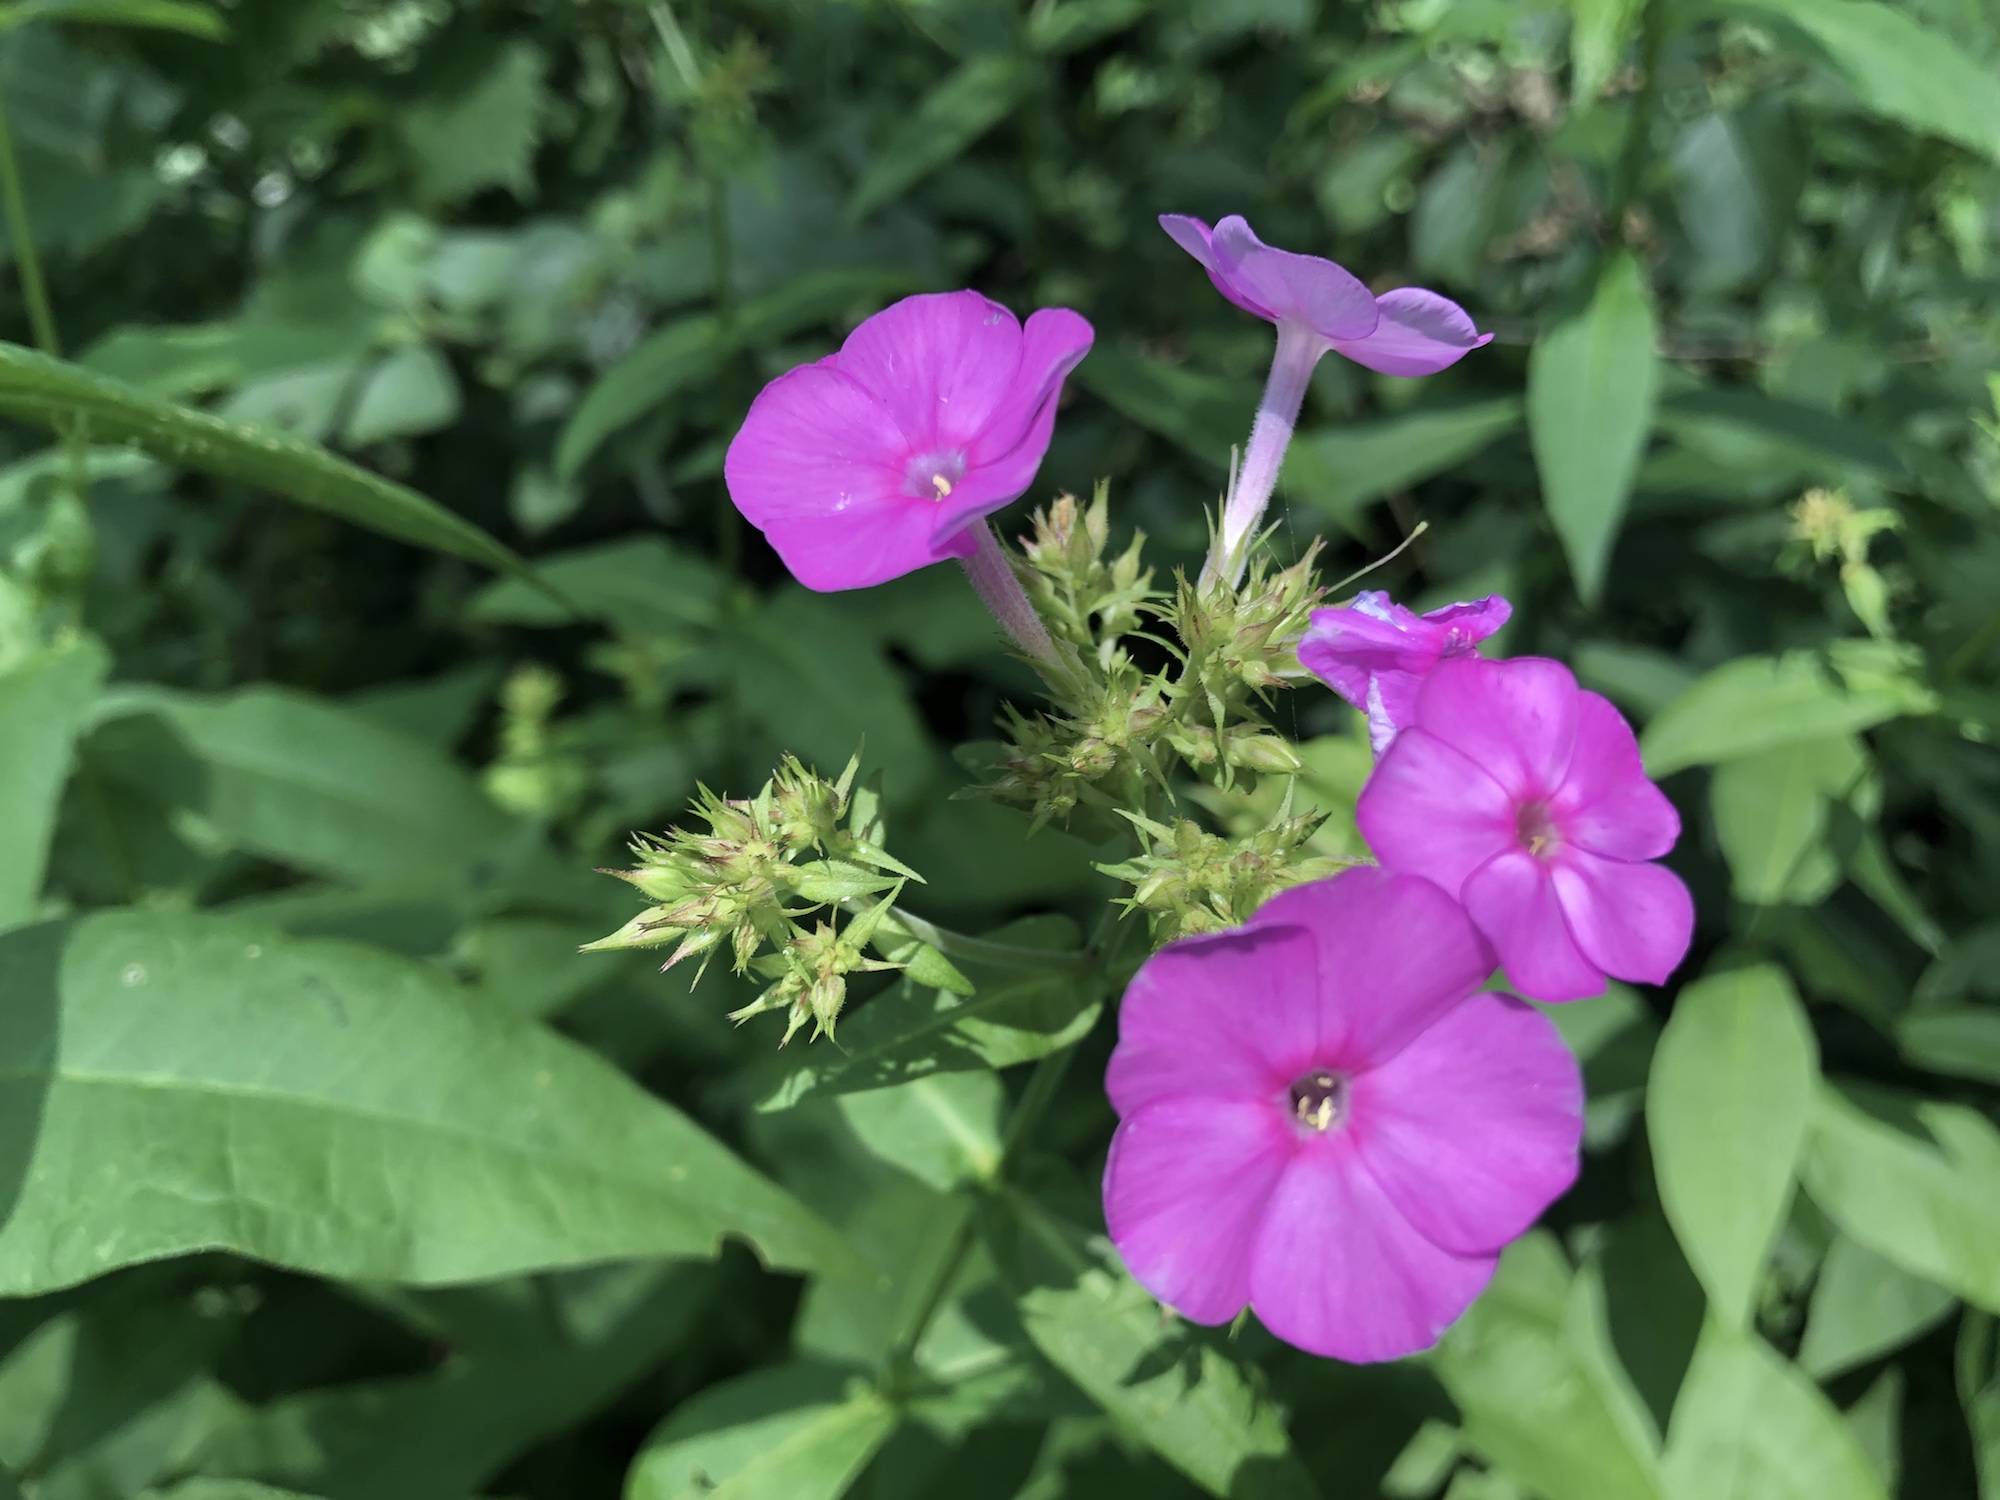 Tall Garden Phlox by Duck Pond on July 23, 2019.